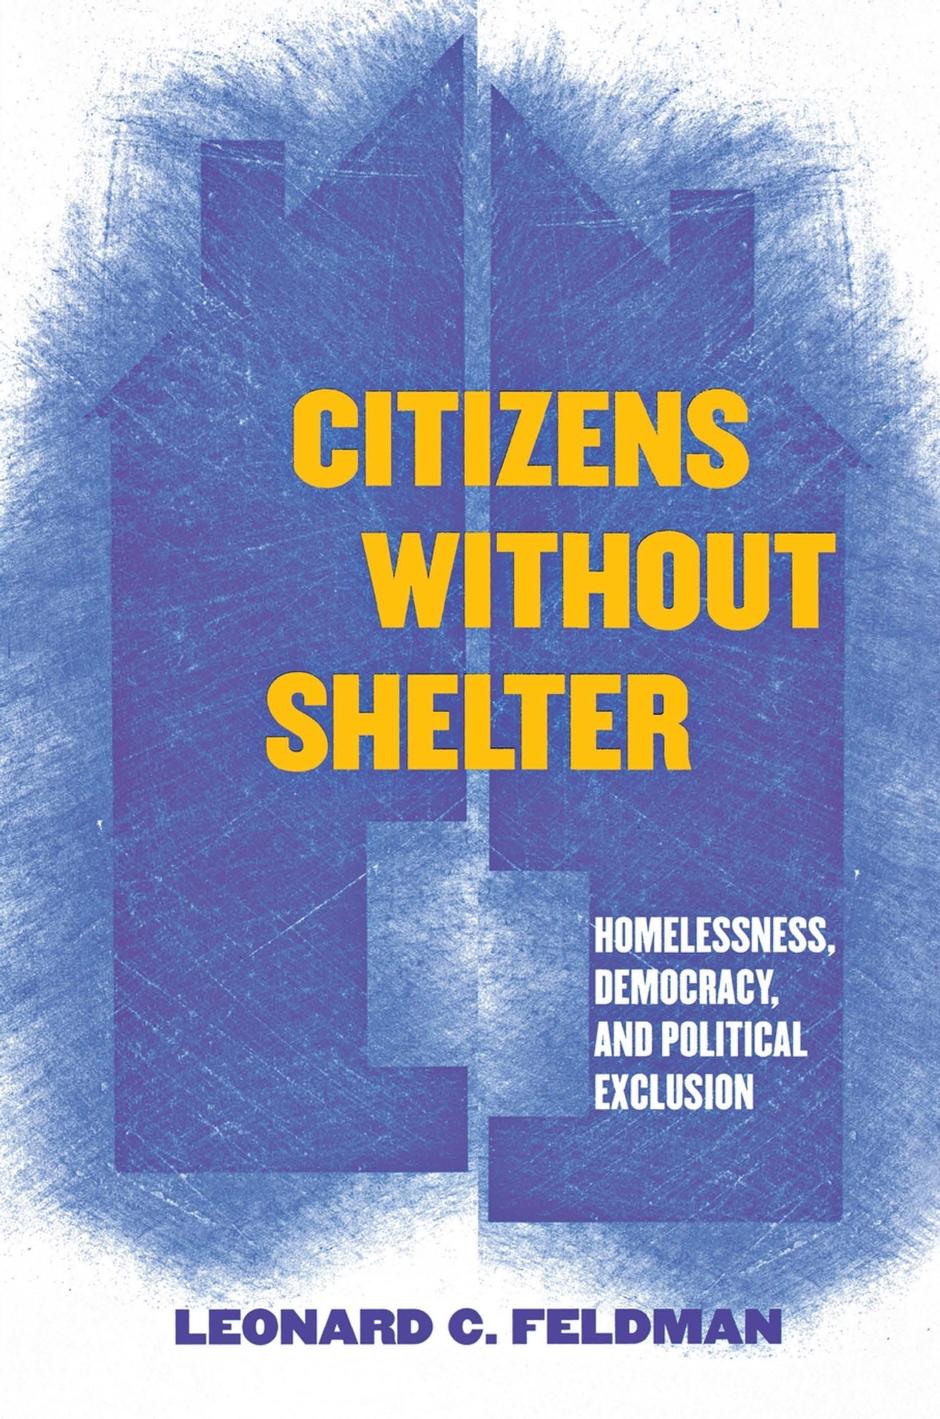 Citizens without Shelter: Homelessness, Democracy, and Political Exclusion by Leonard C. Feldman